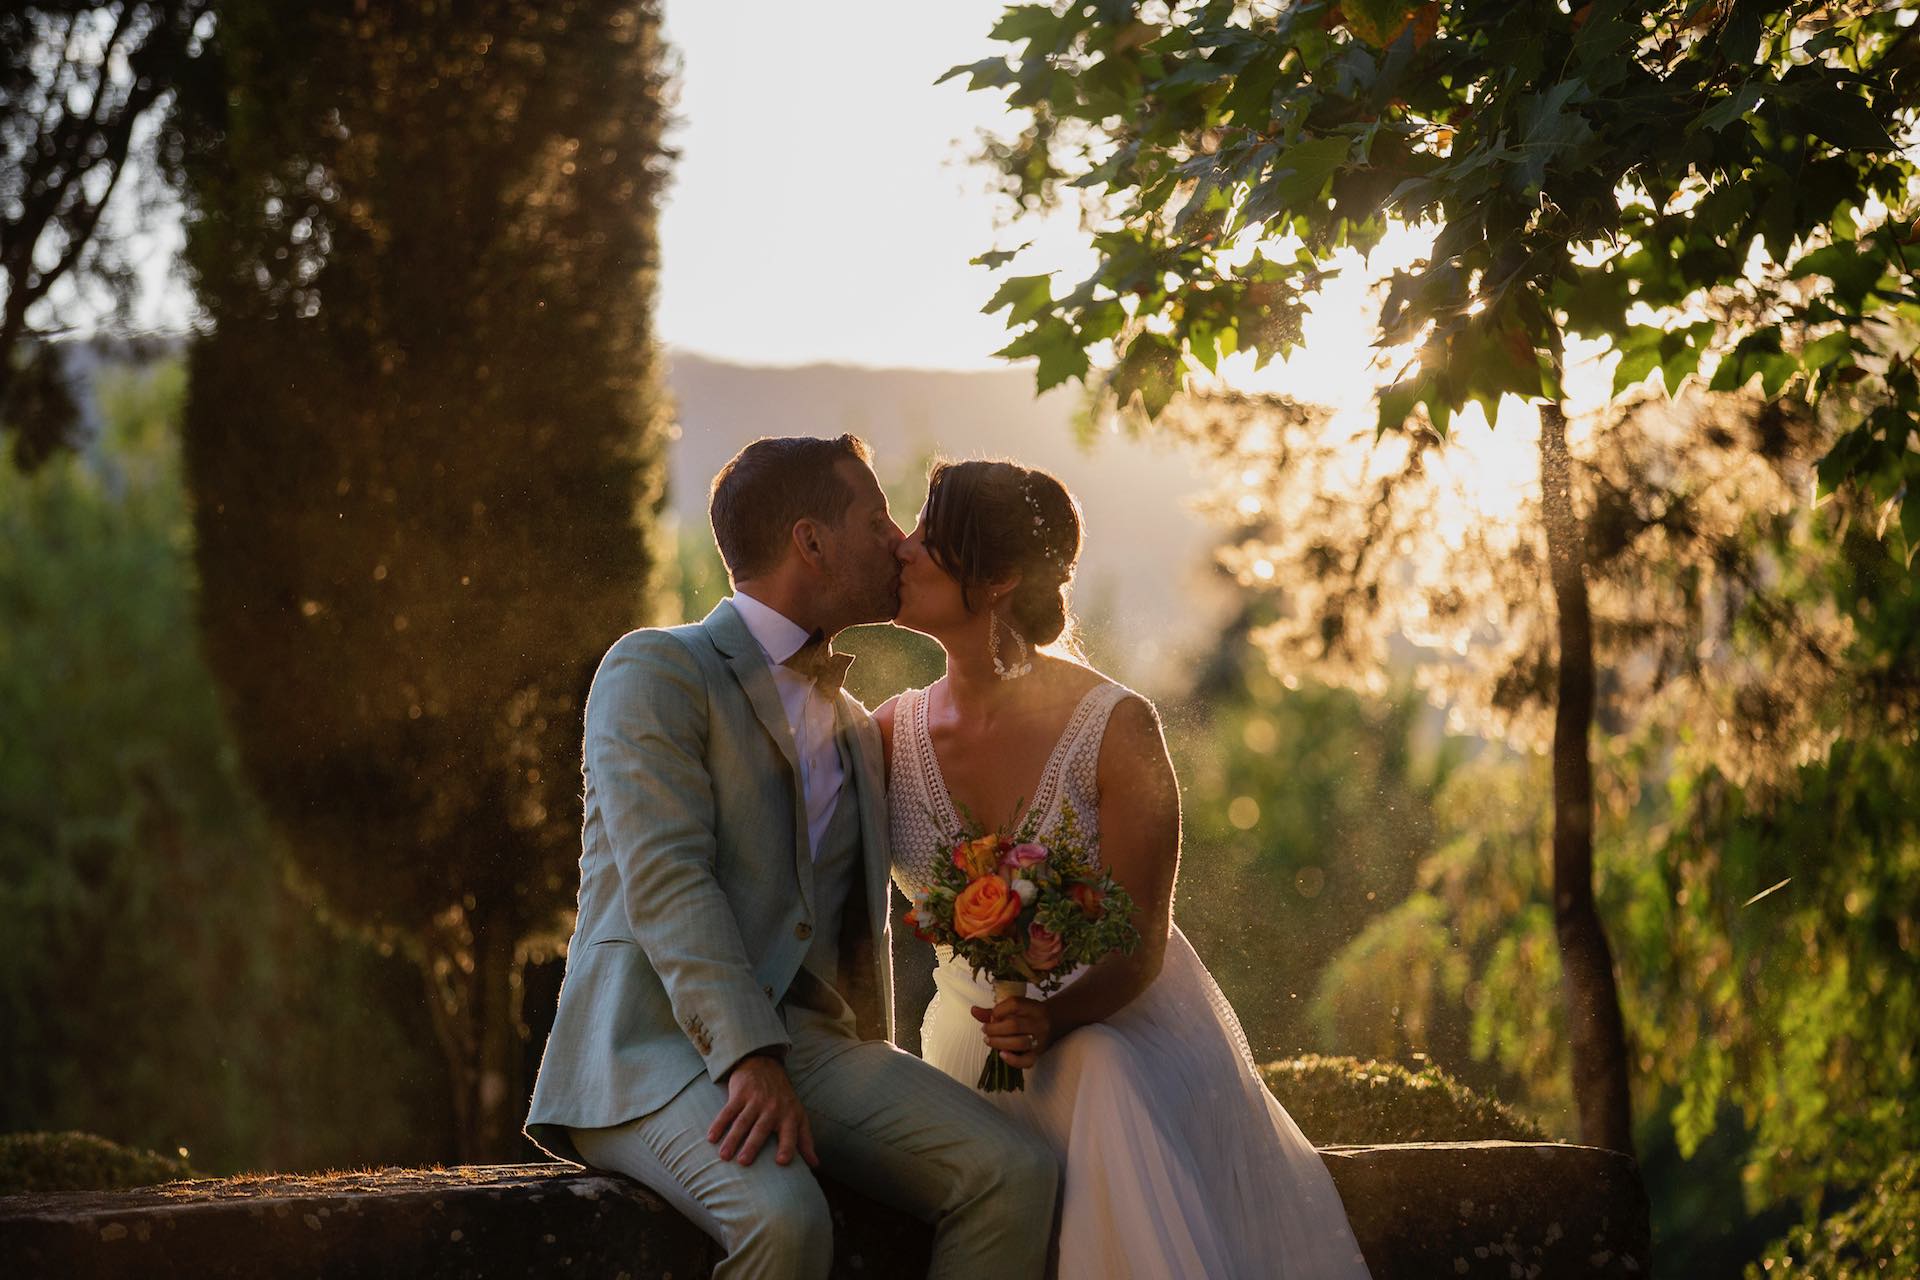 Where to get married in Tuscany